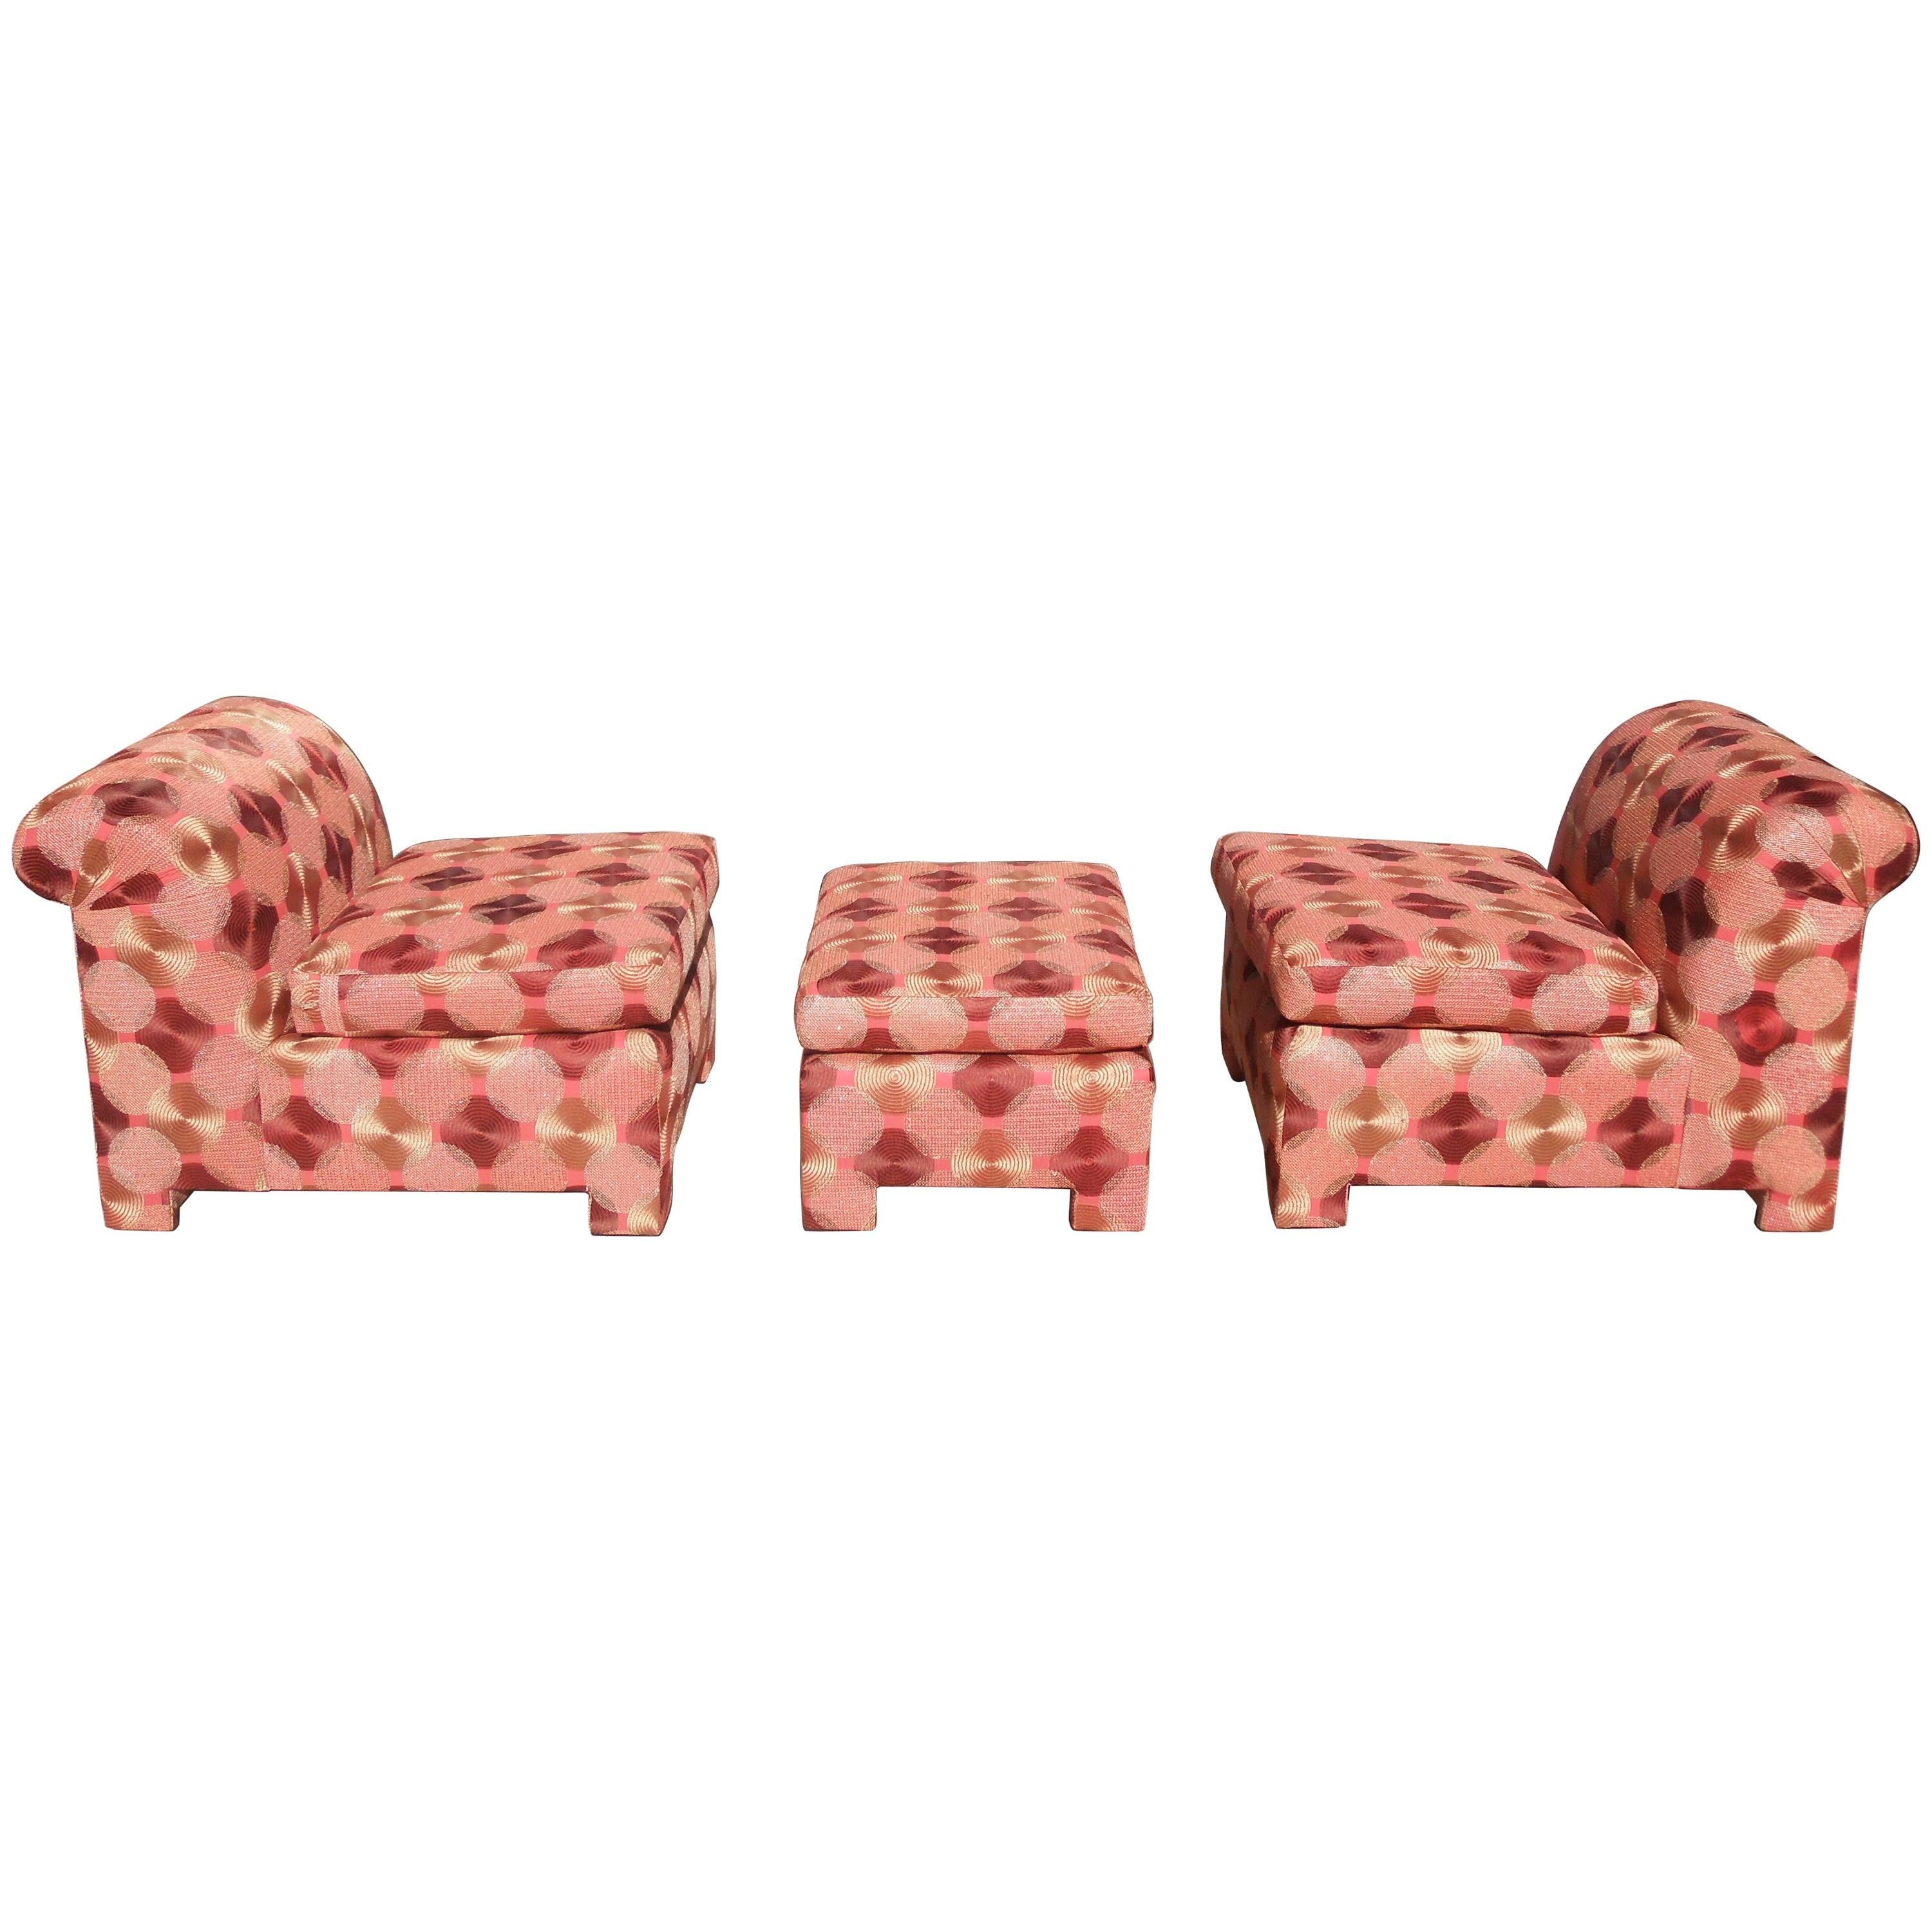 Pair of Slipper Chairs with Matching Ottoman in Chic Metallic Embroidered Fabric